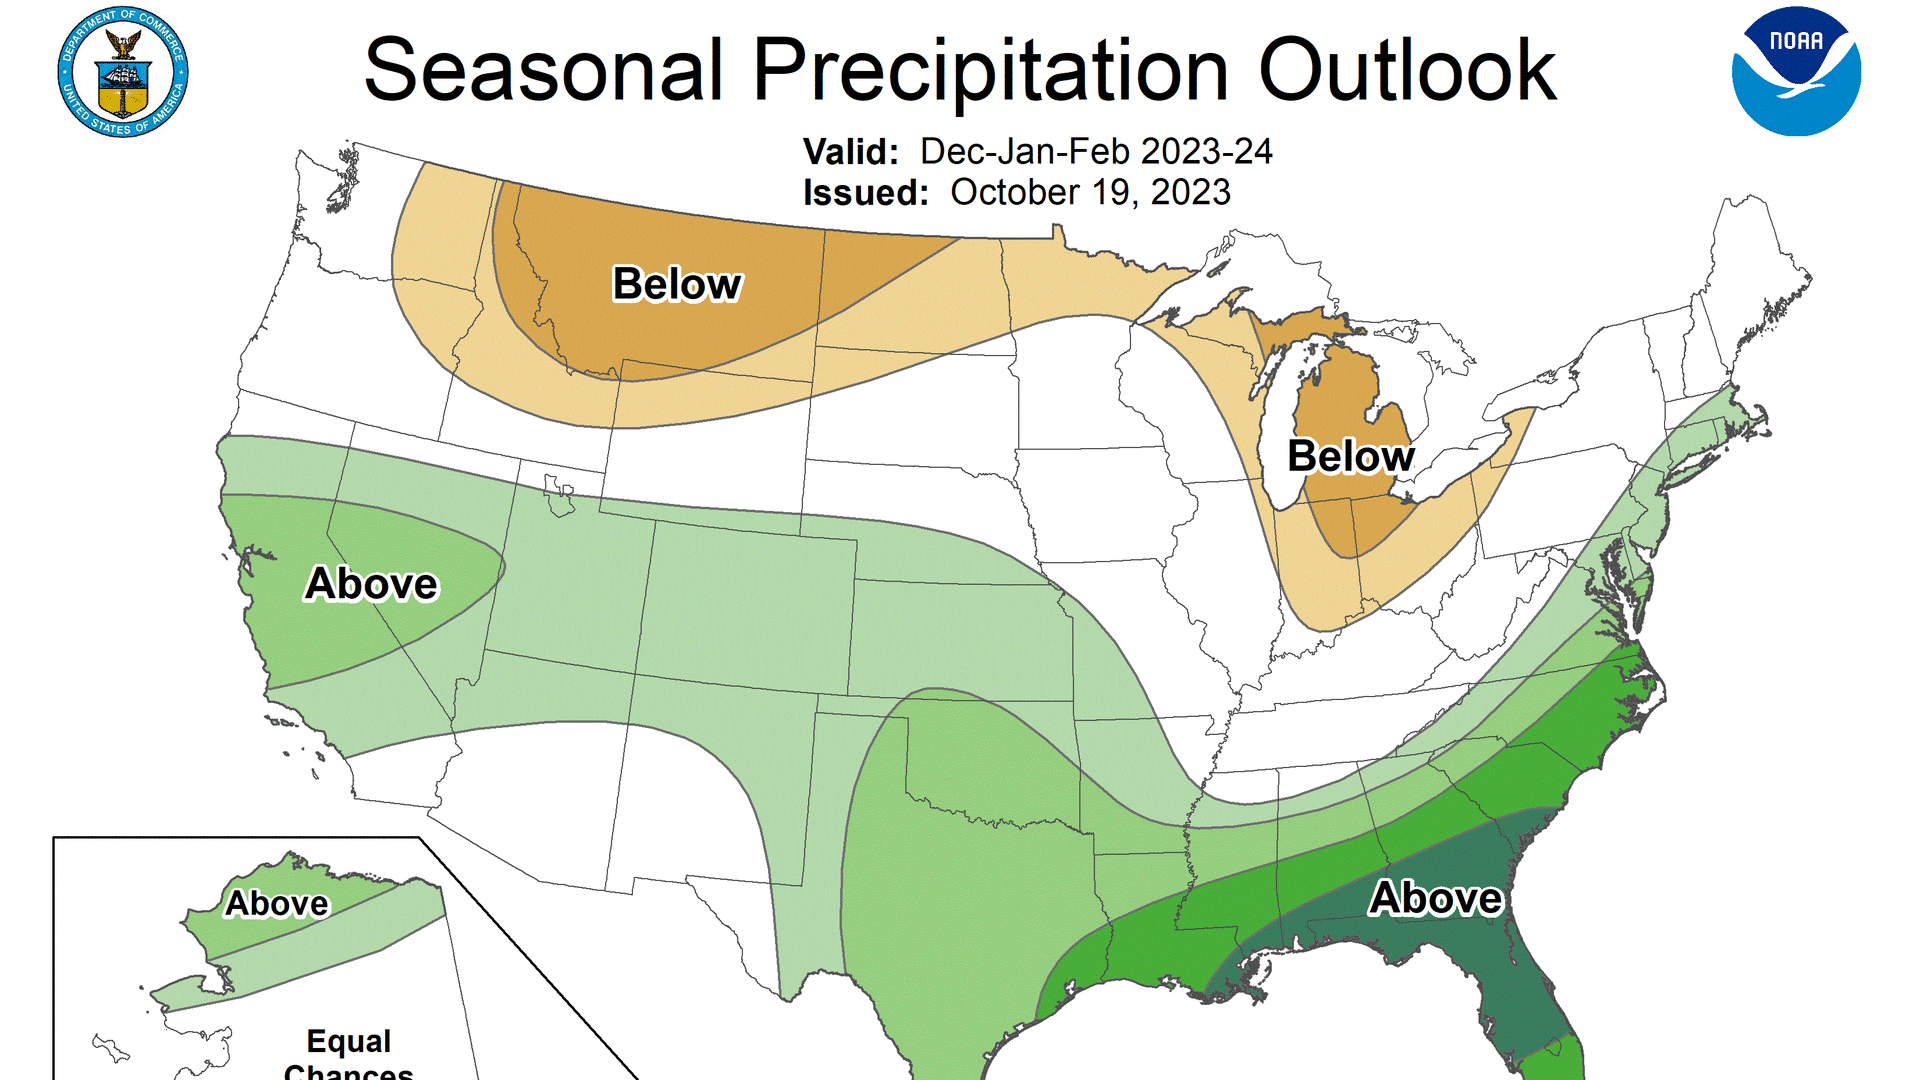 Precipitation outlook for the U.S. between December and February, according to the NOAA. 